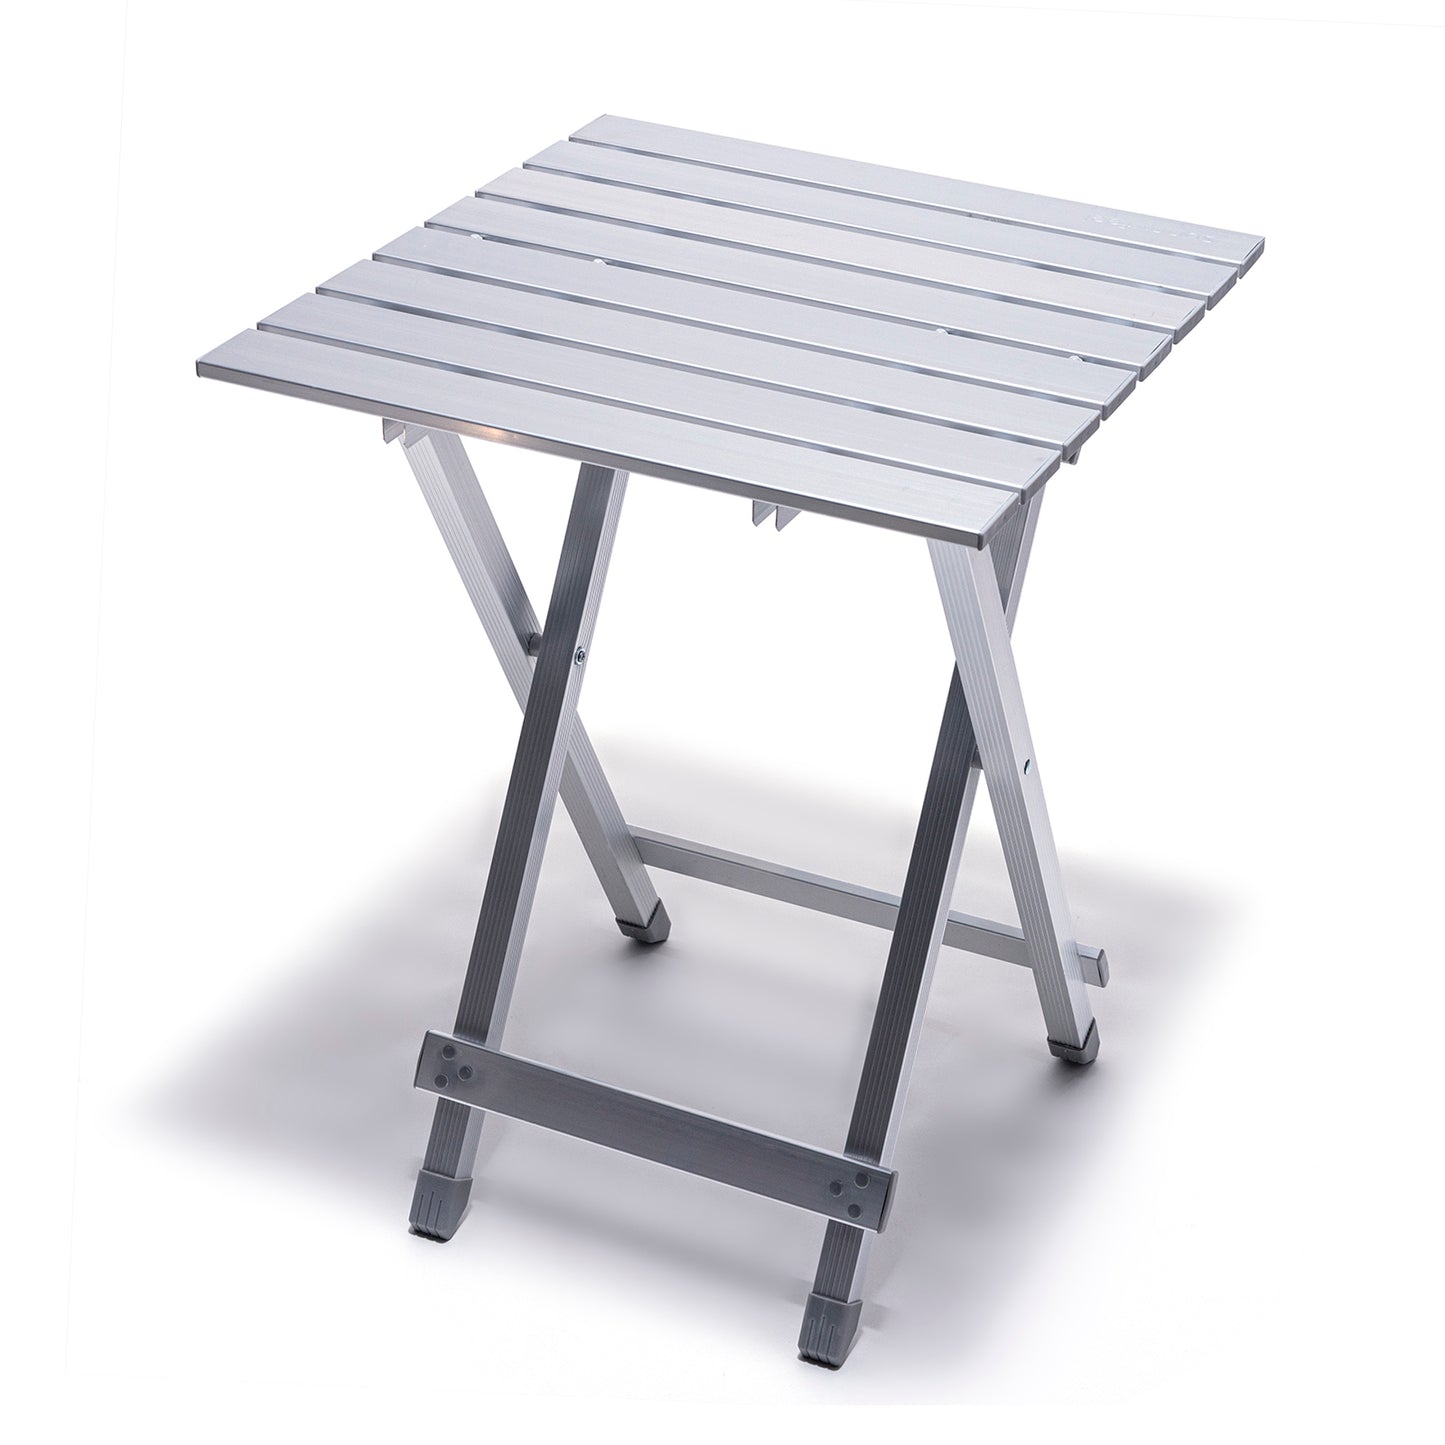 SunnyFeel AT2001D Ultra Lite Camping Table